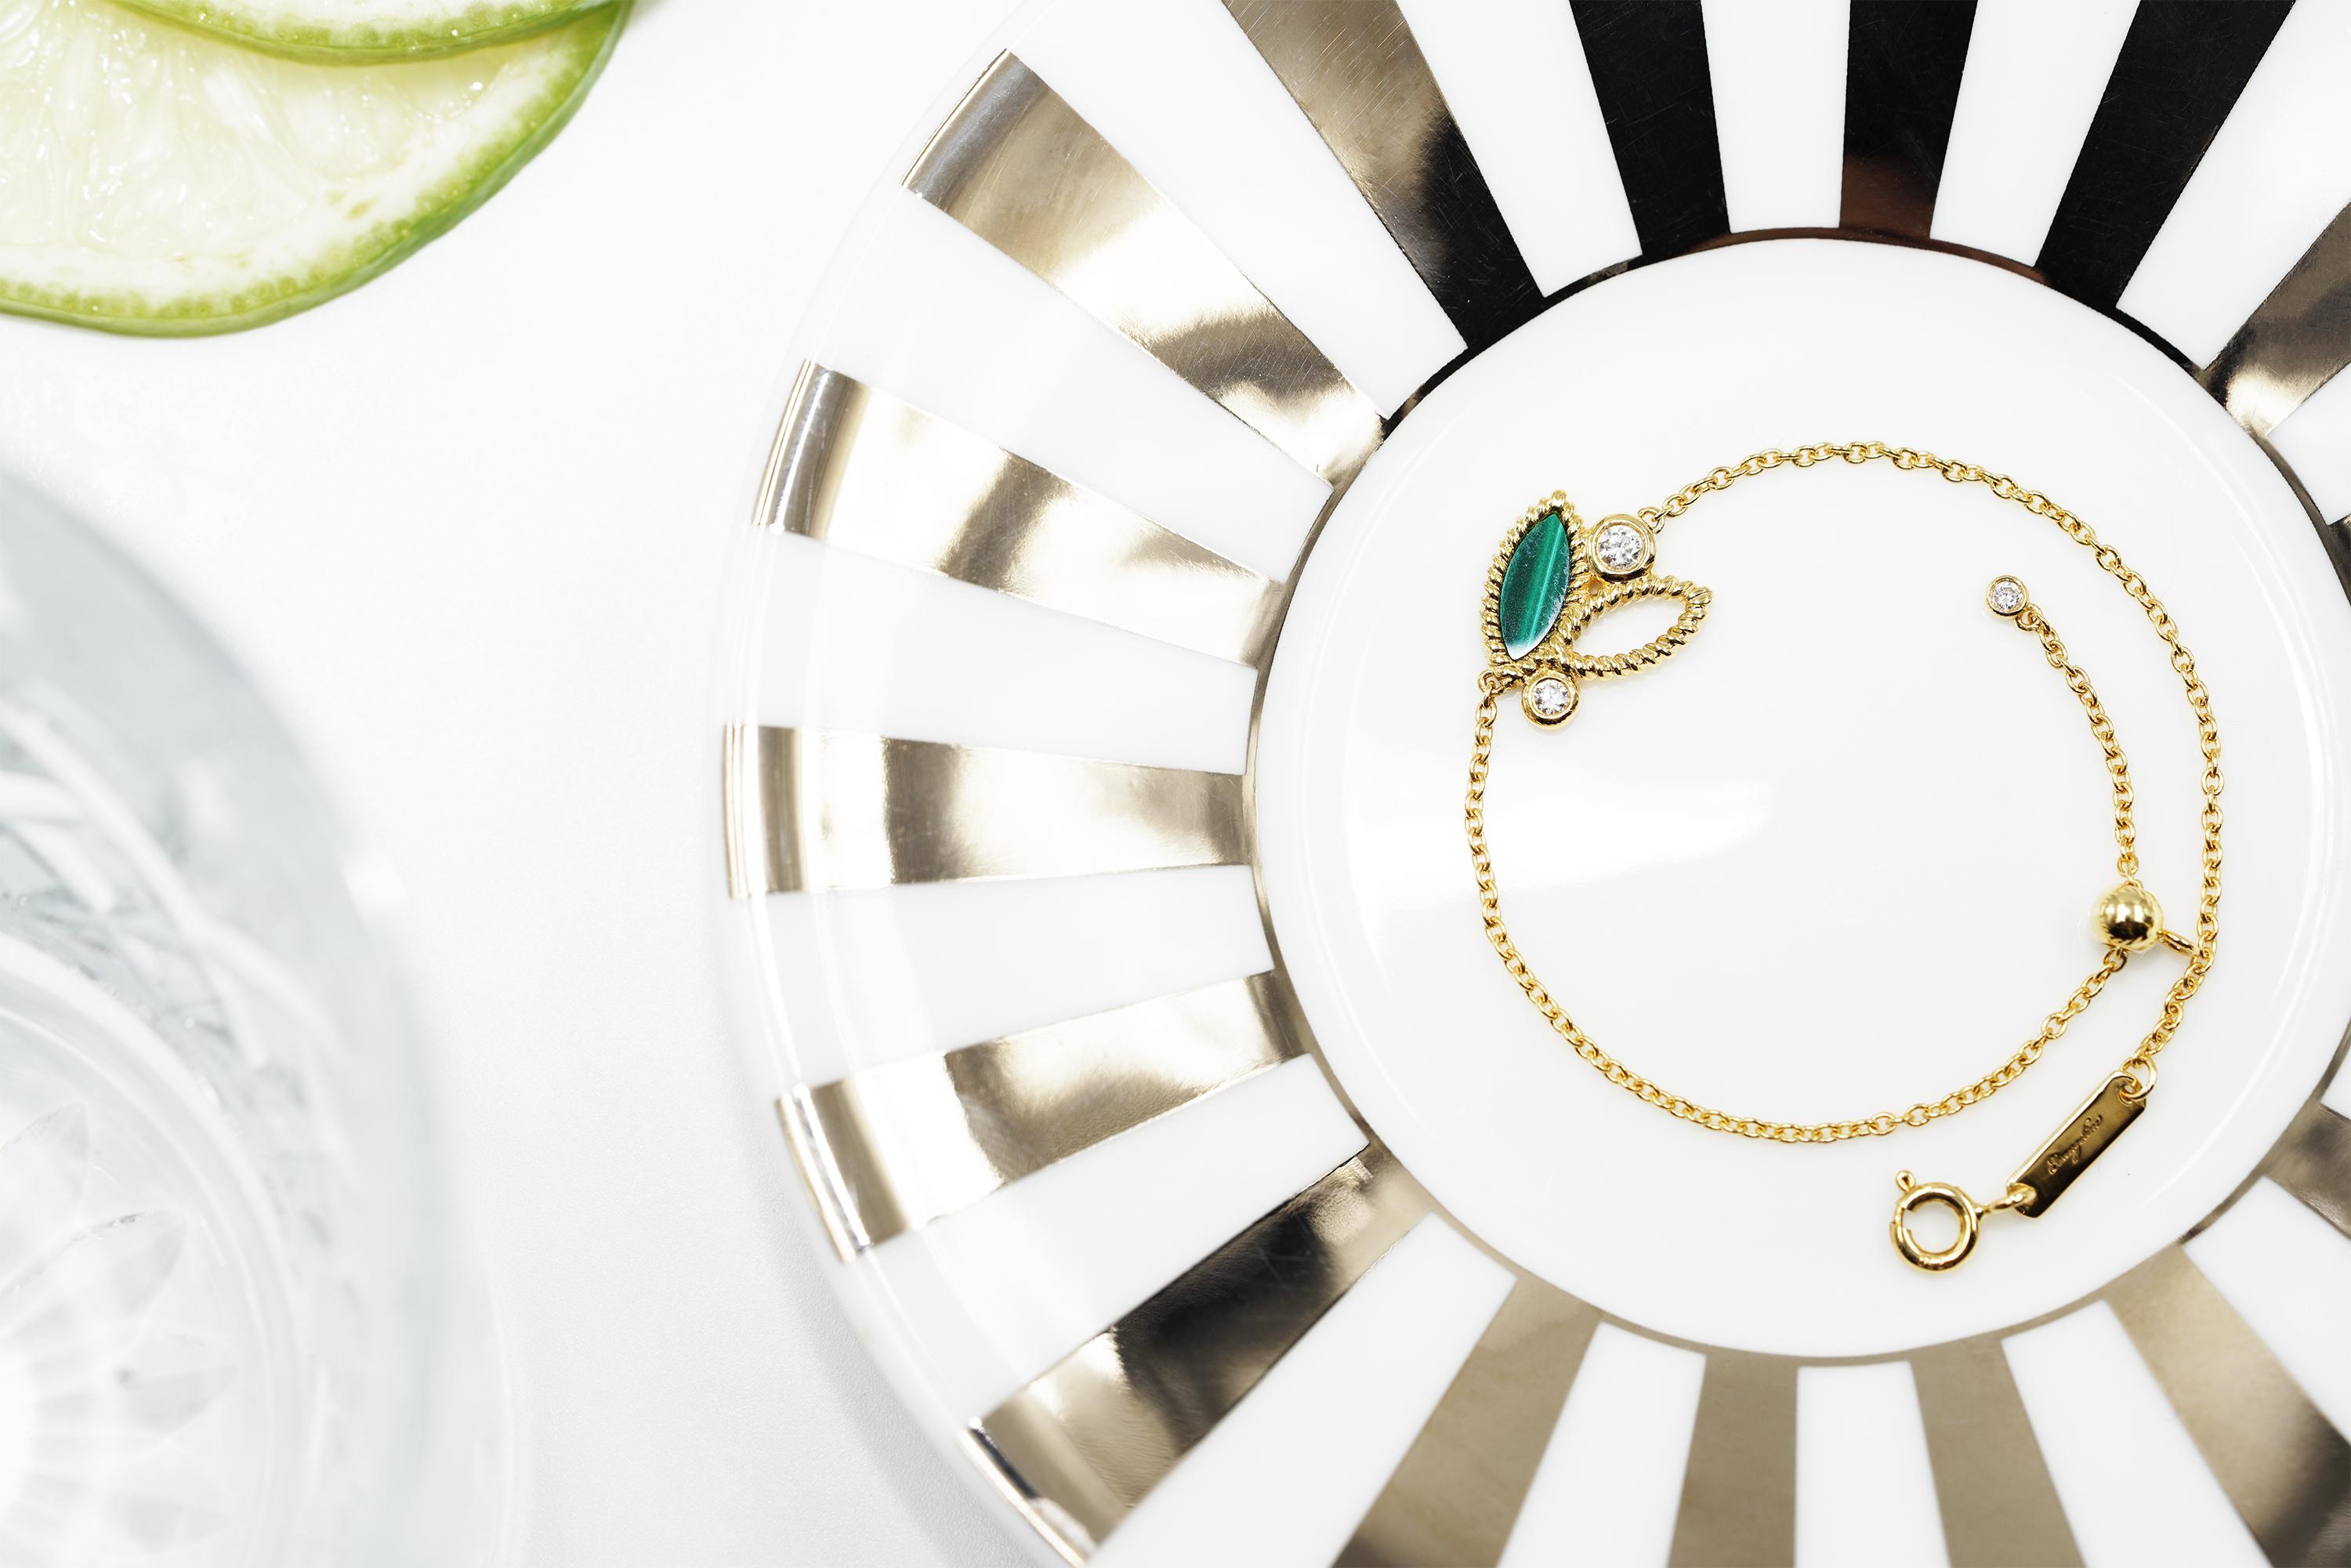 18k yellow gold, 2.9g.  
3 Diamonds, Total Carat Weight: 0.12ct 
Stone: Malachite

This charming mini bracelet is the ideal piece for any occasion. As the latest addition to the popular Q Garden collection, the Mini Q Garden collection includes